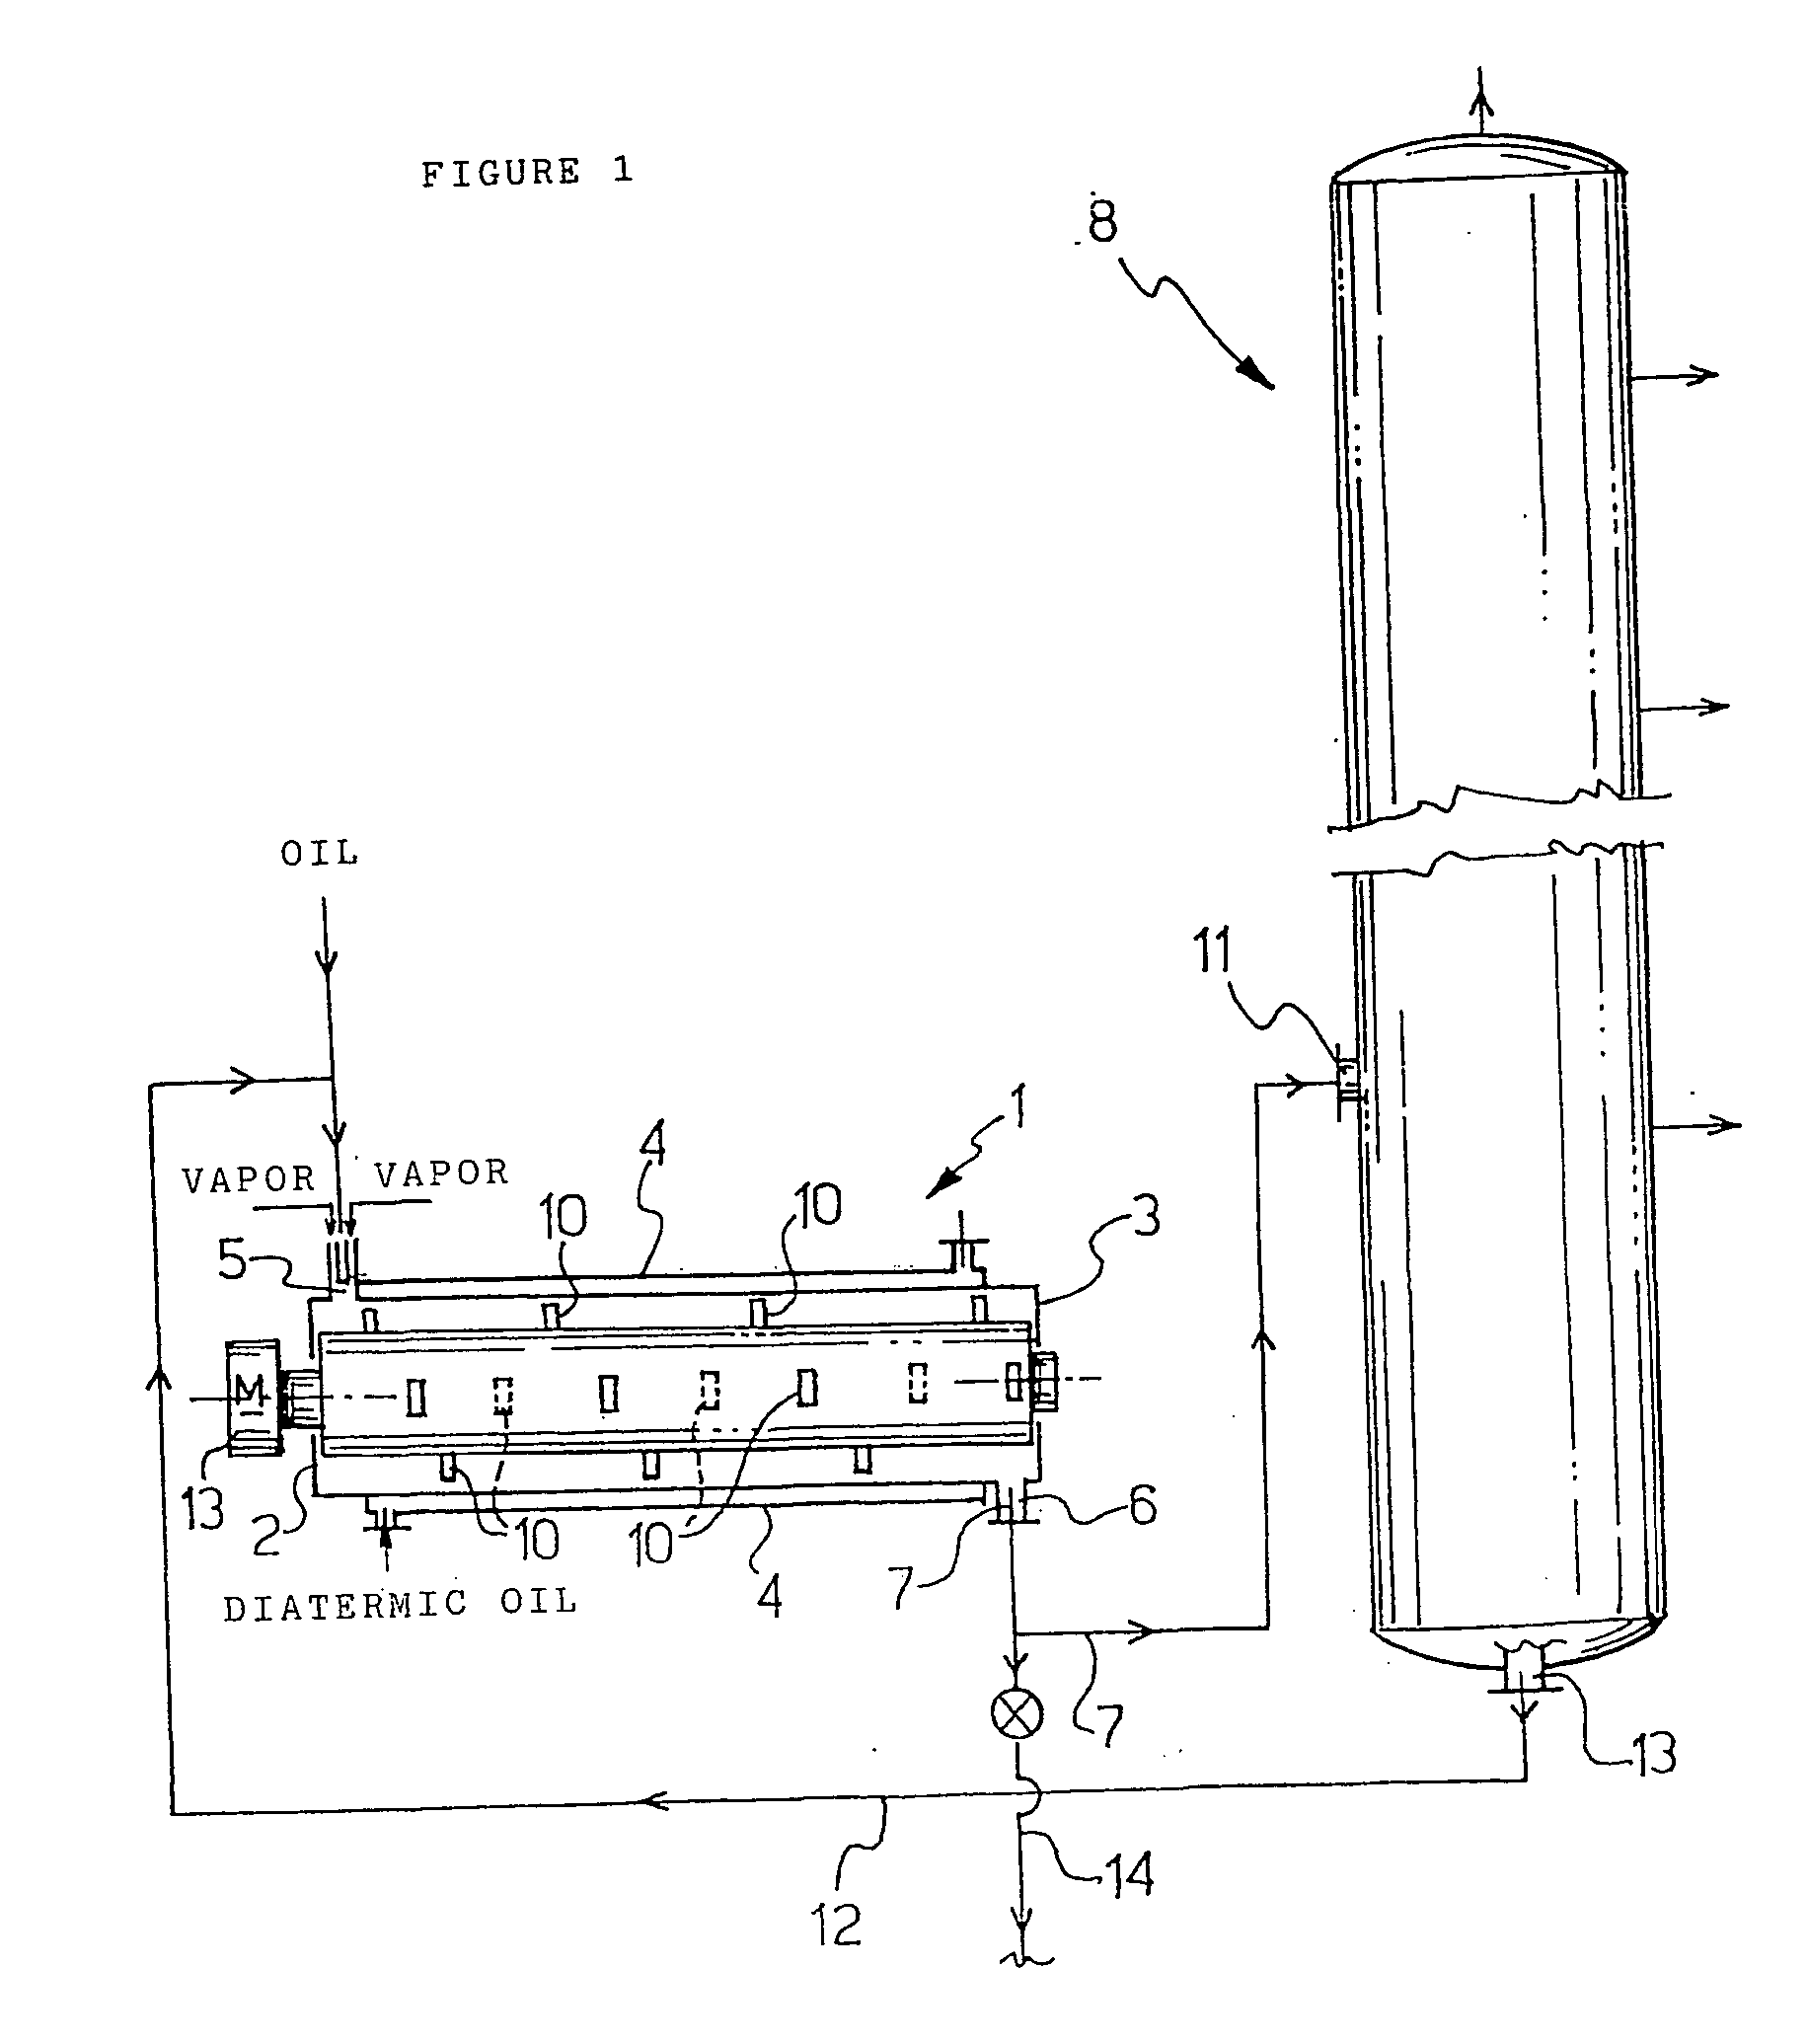 Process and apparatus for the fractional distillation of crude oil